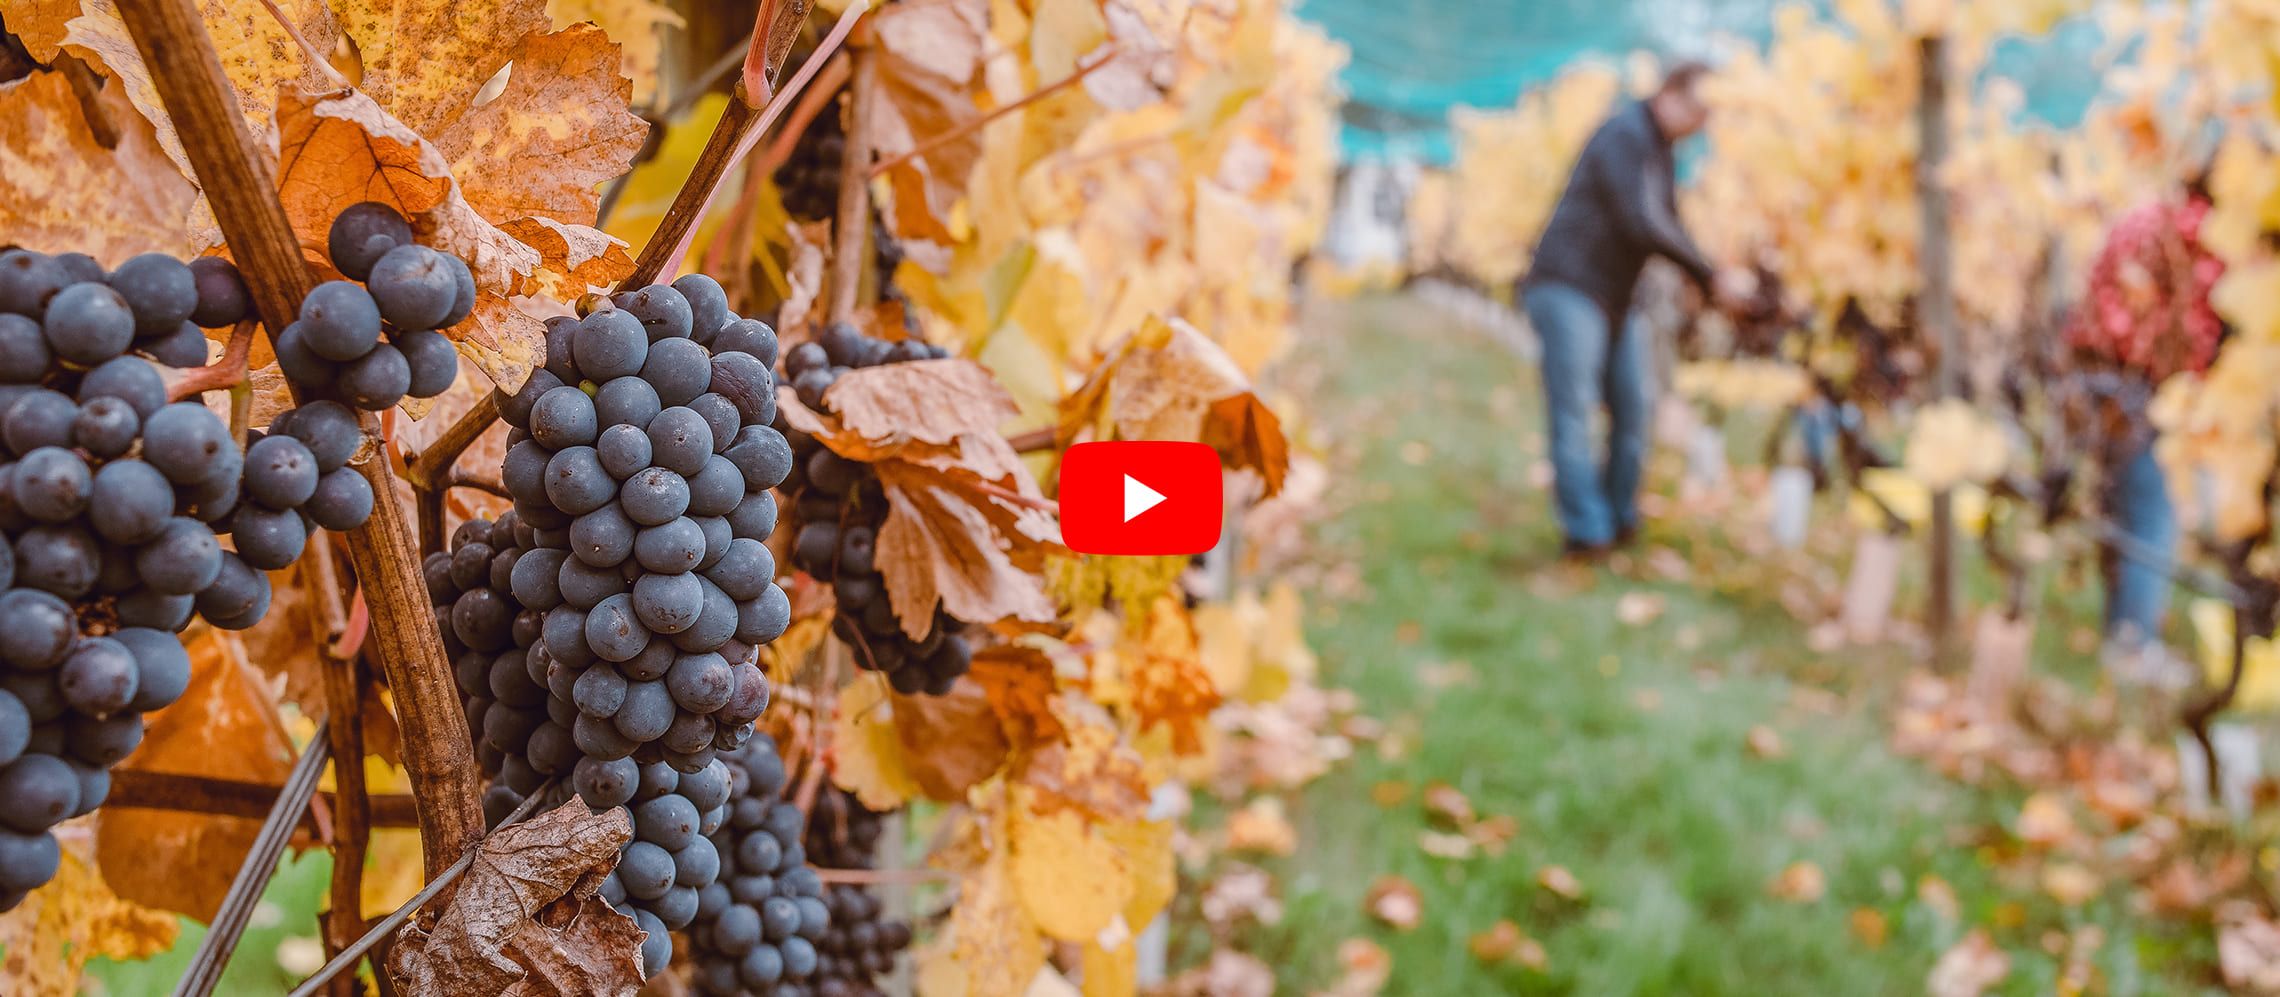 Photo for: 10 Wineries That Are Winning On YouTube Today